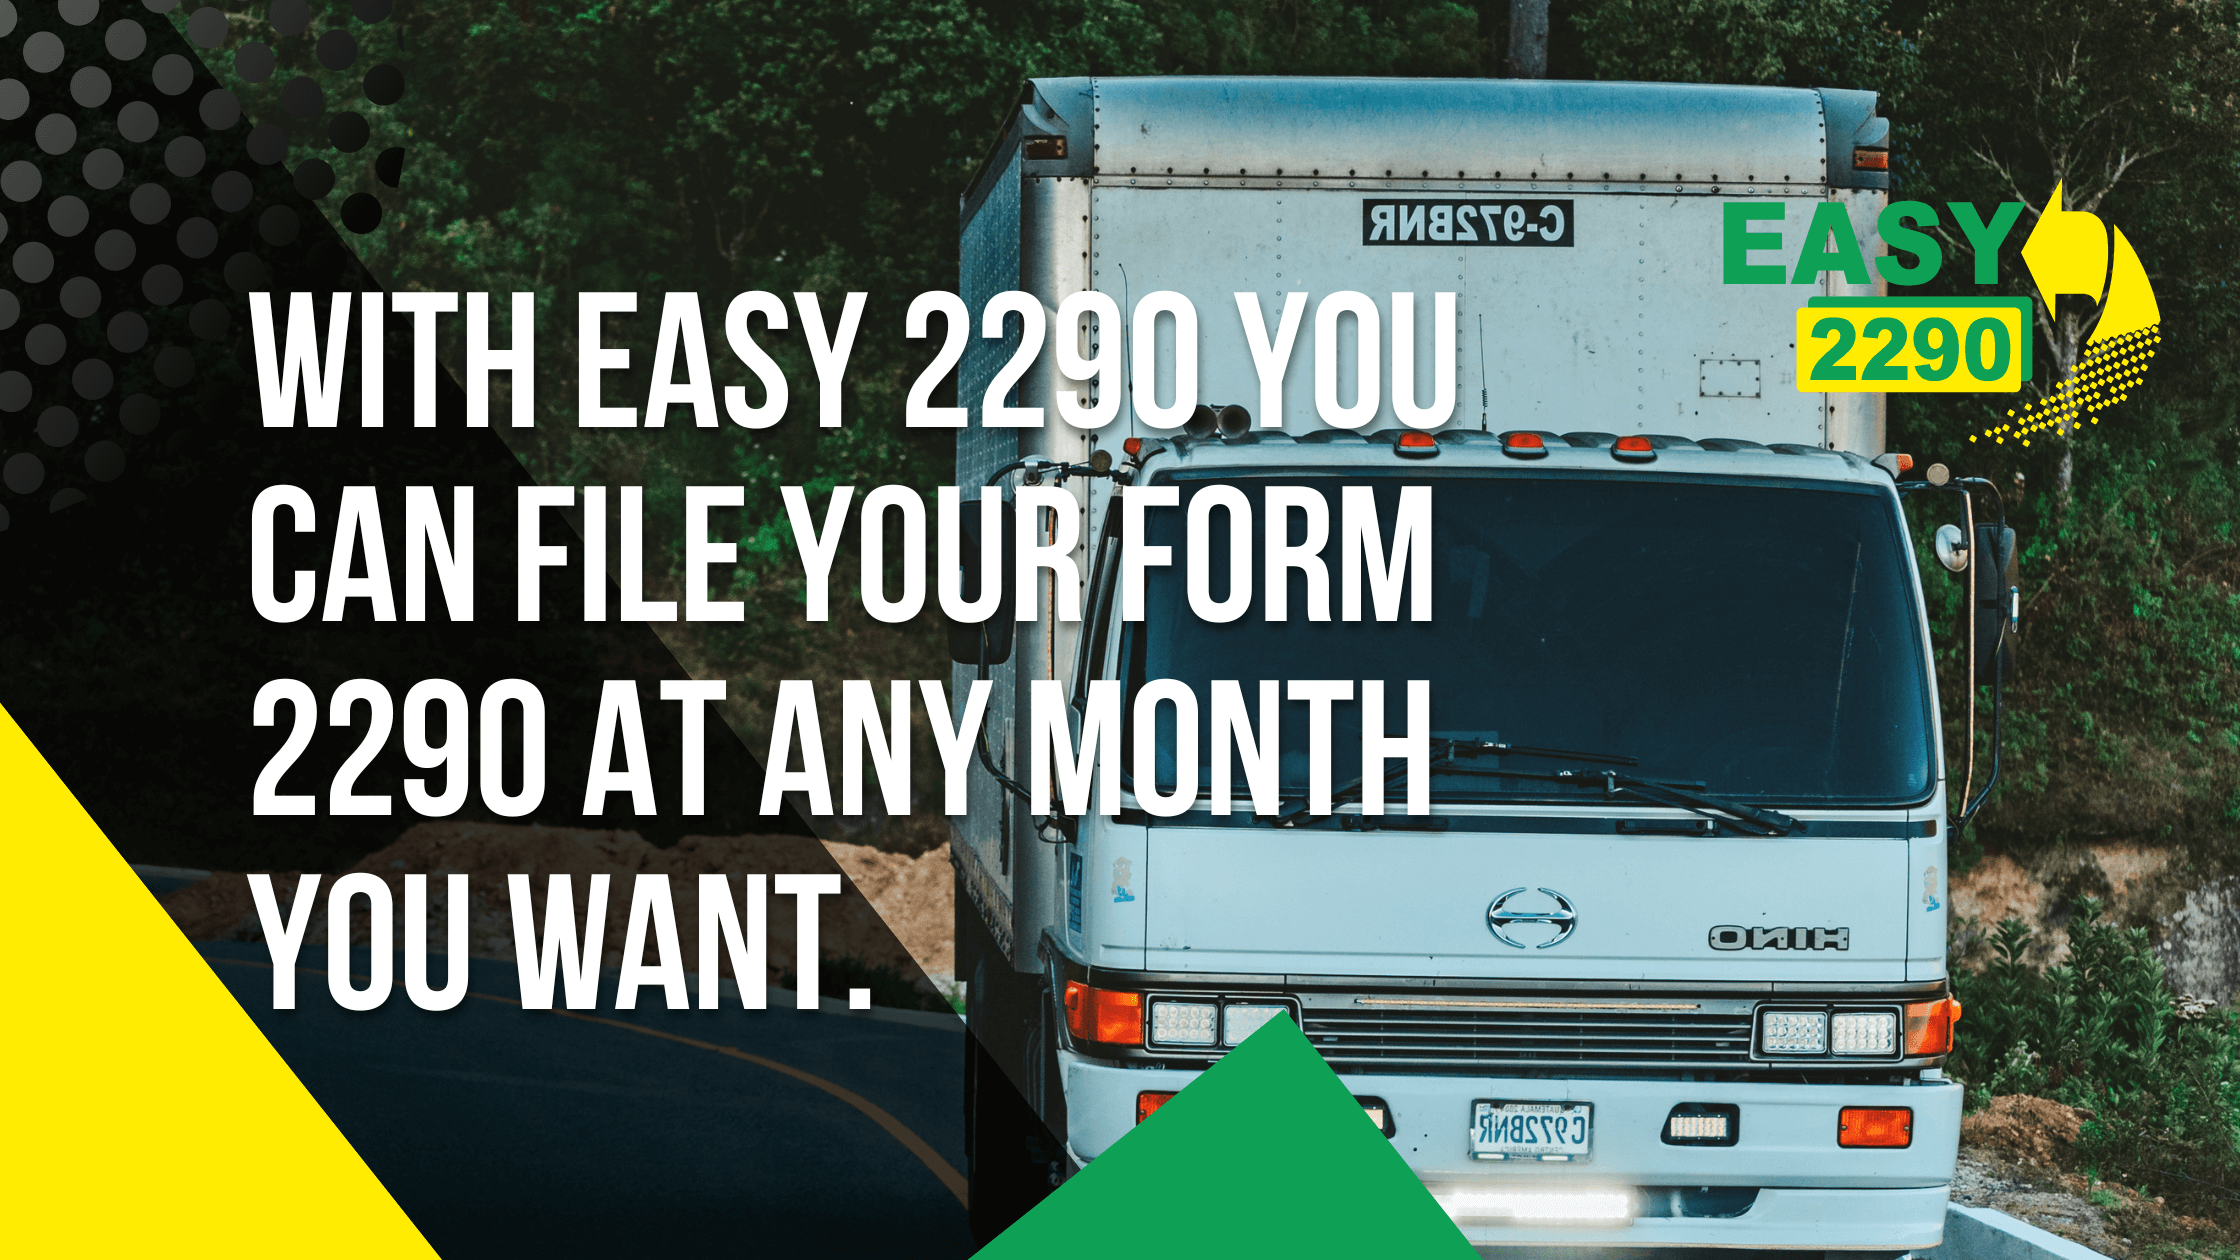 With Easy 2290 You can File Your Form 2290 At Any Month You want.